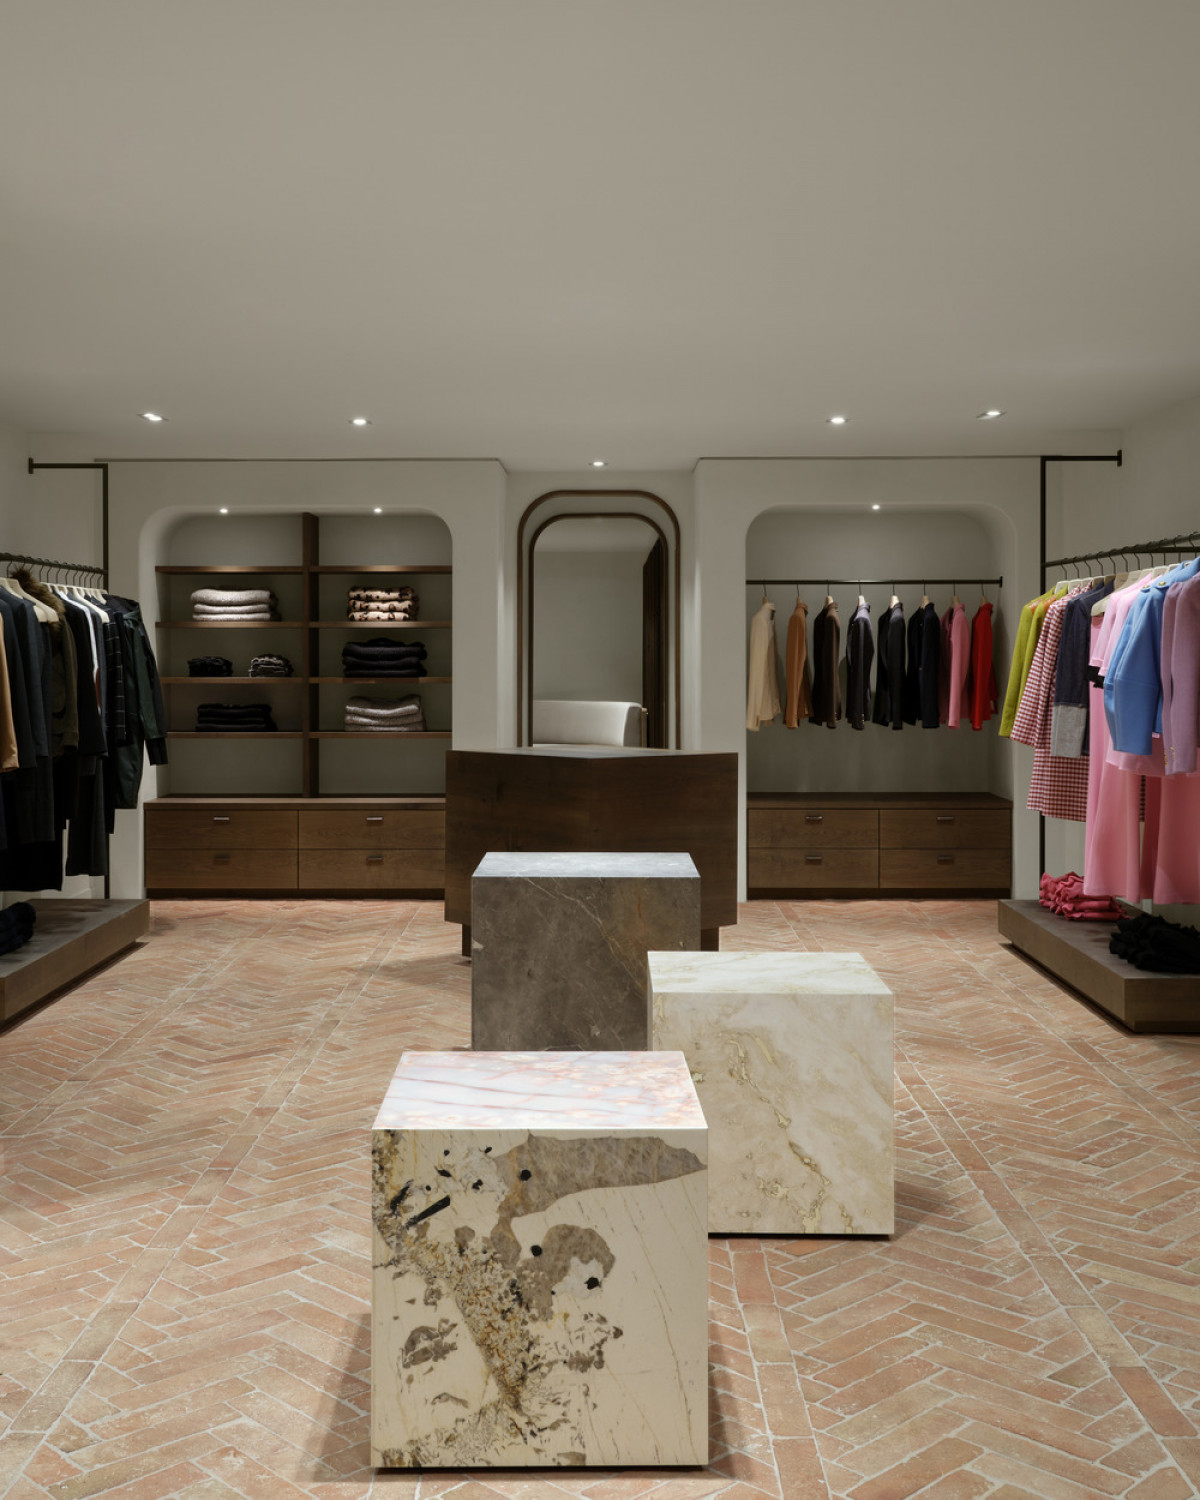 A narrow cash area is hidden between the front of the shop and the change rooms at the back.